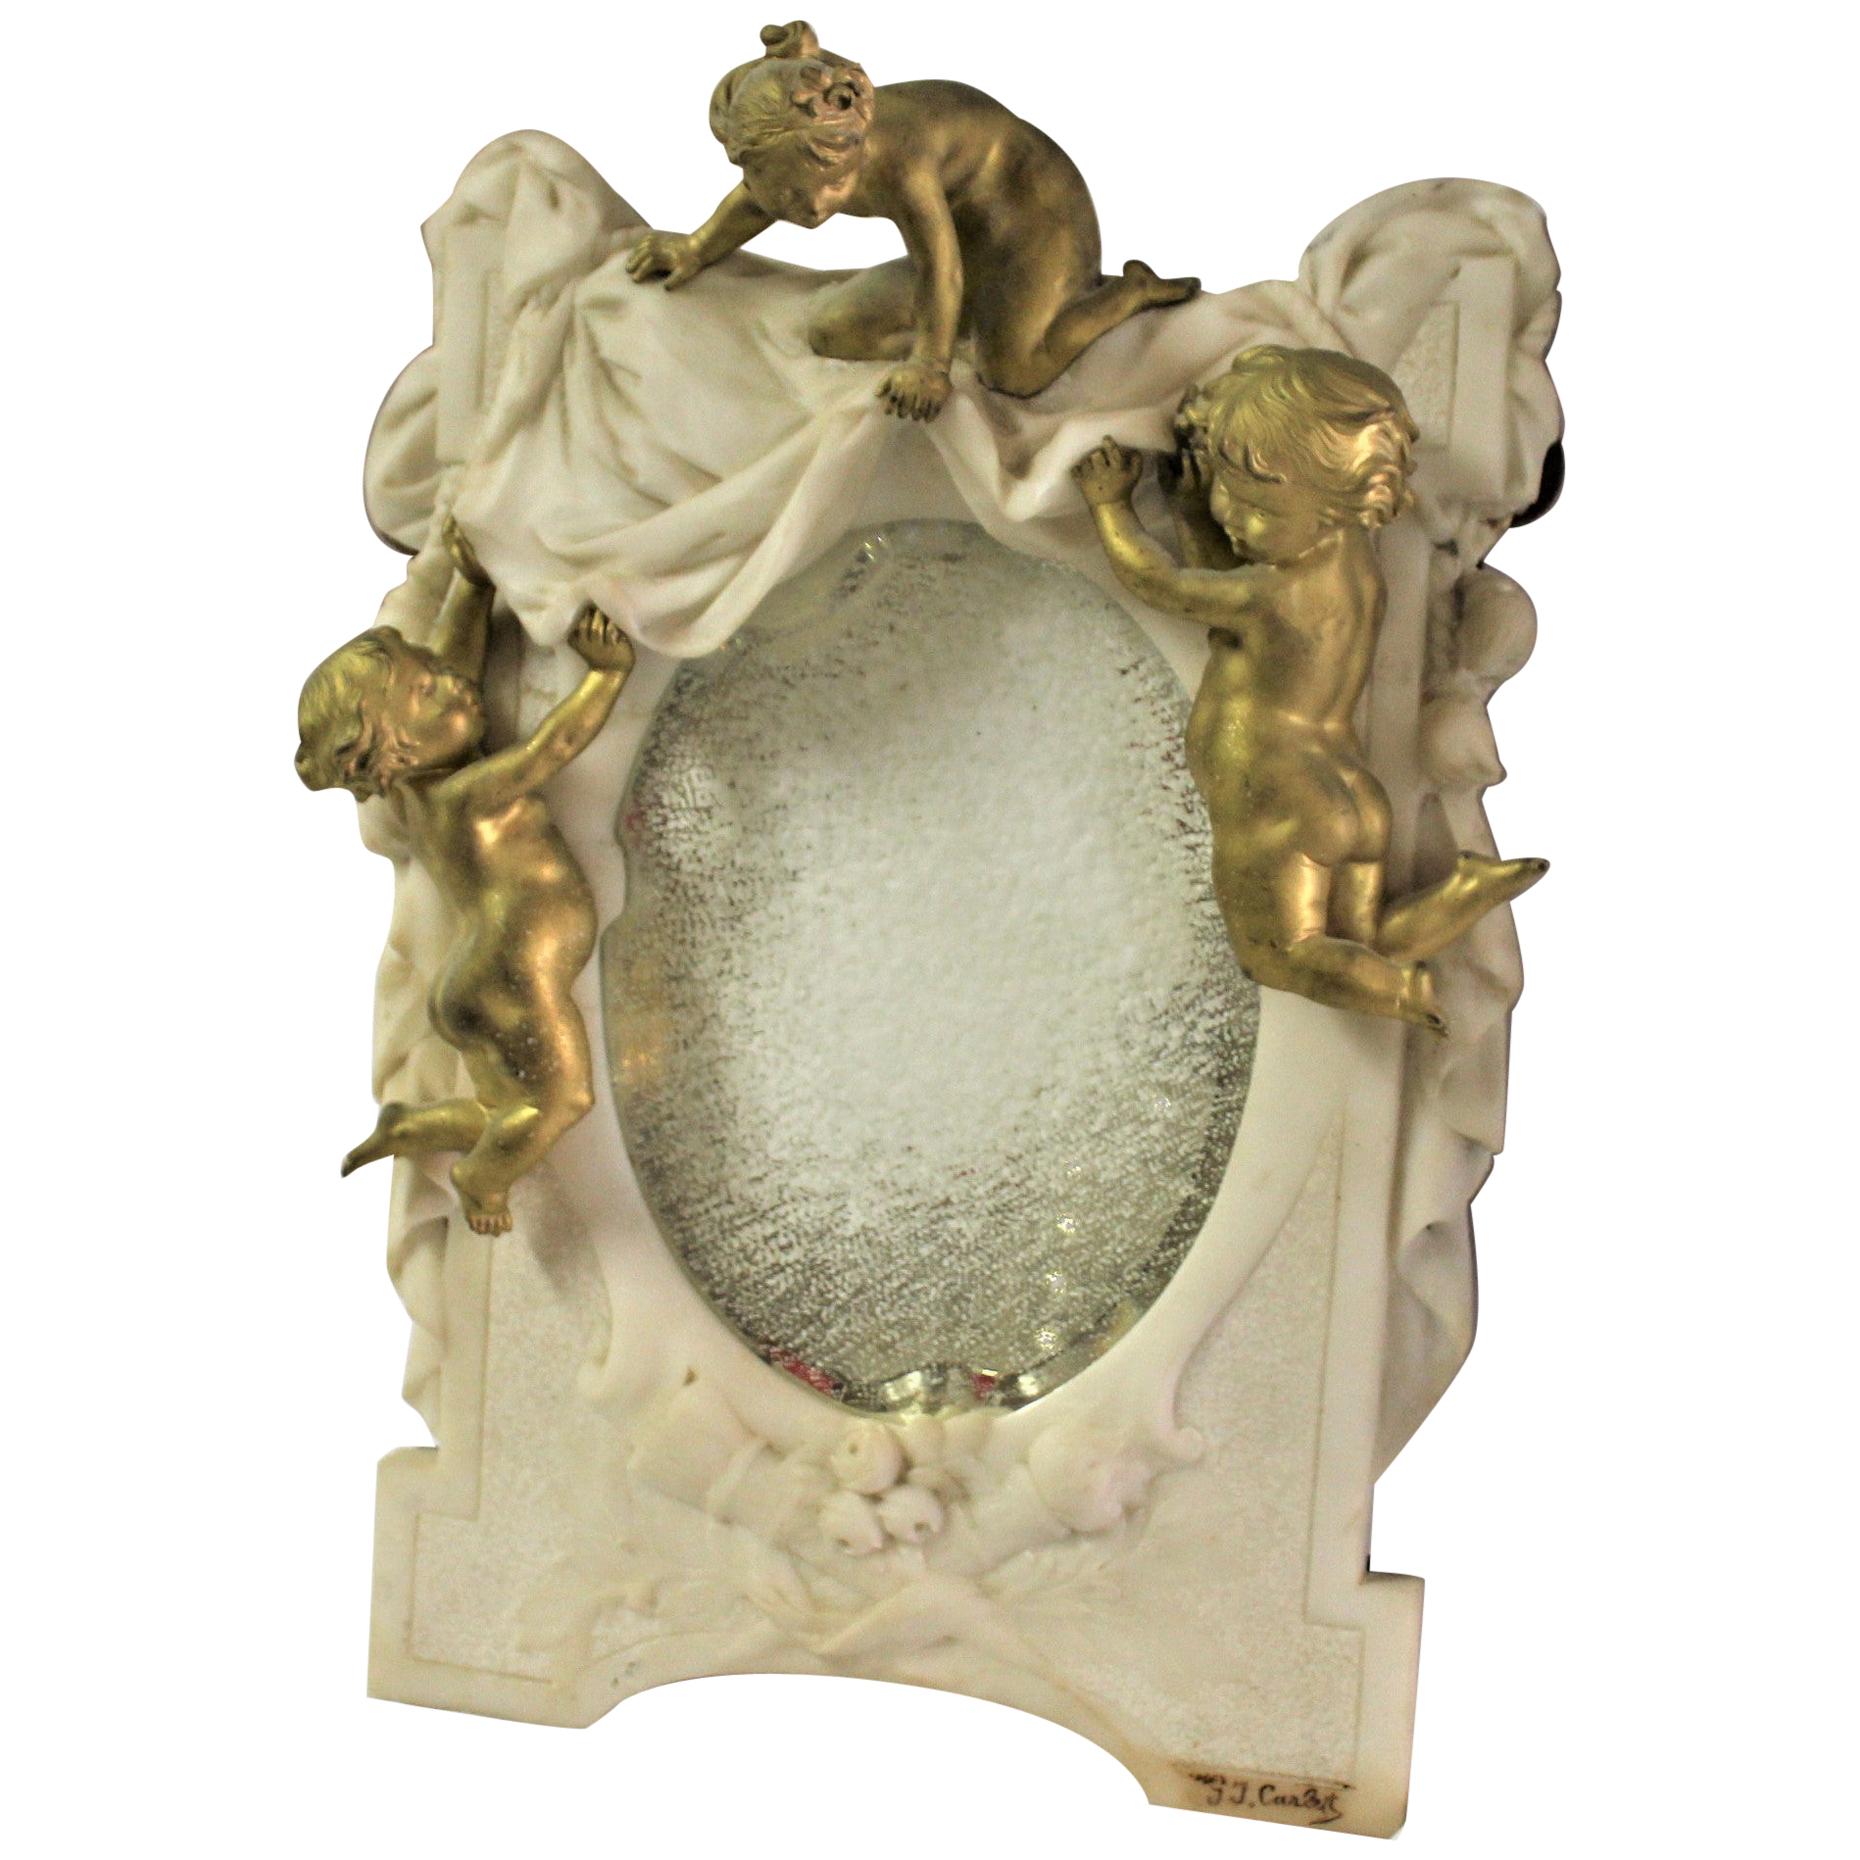 Antique Marble and Cherub Mirror, Doré Gold Finish Signed